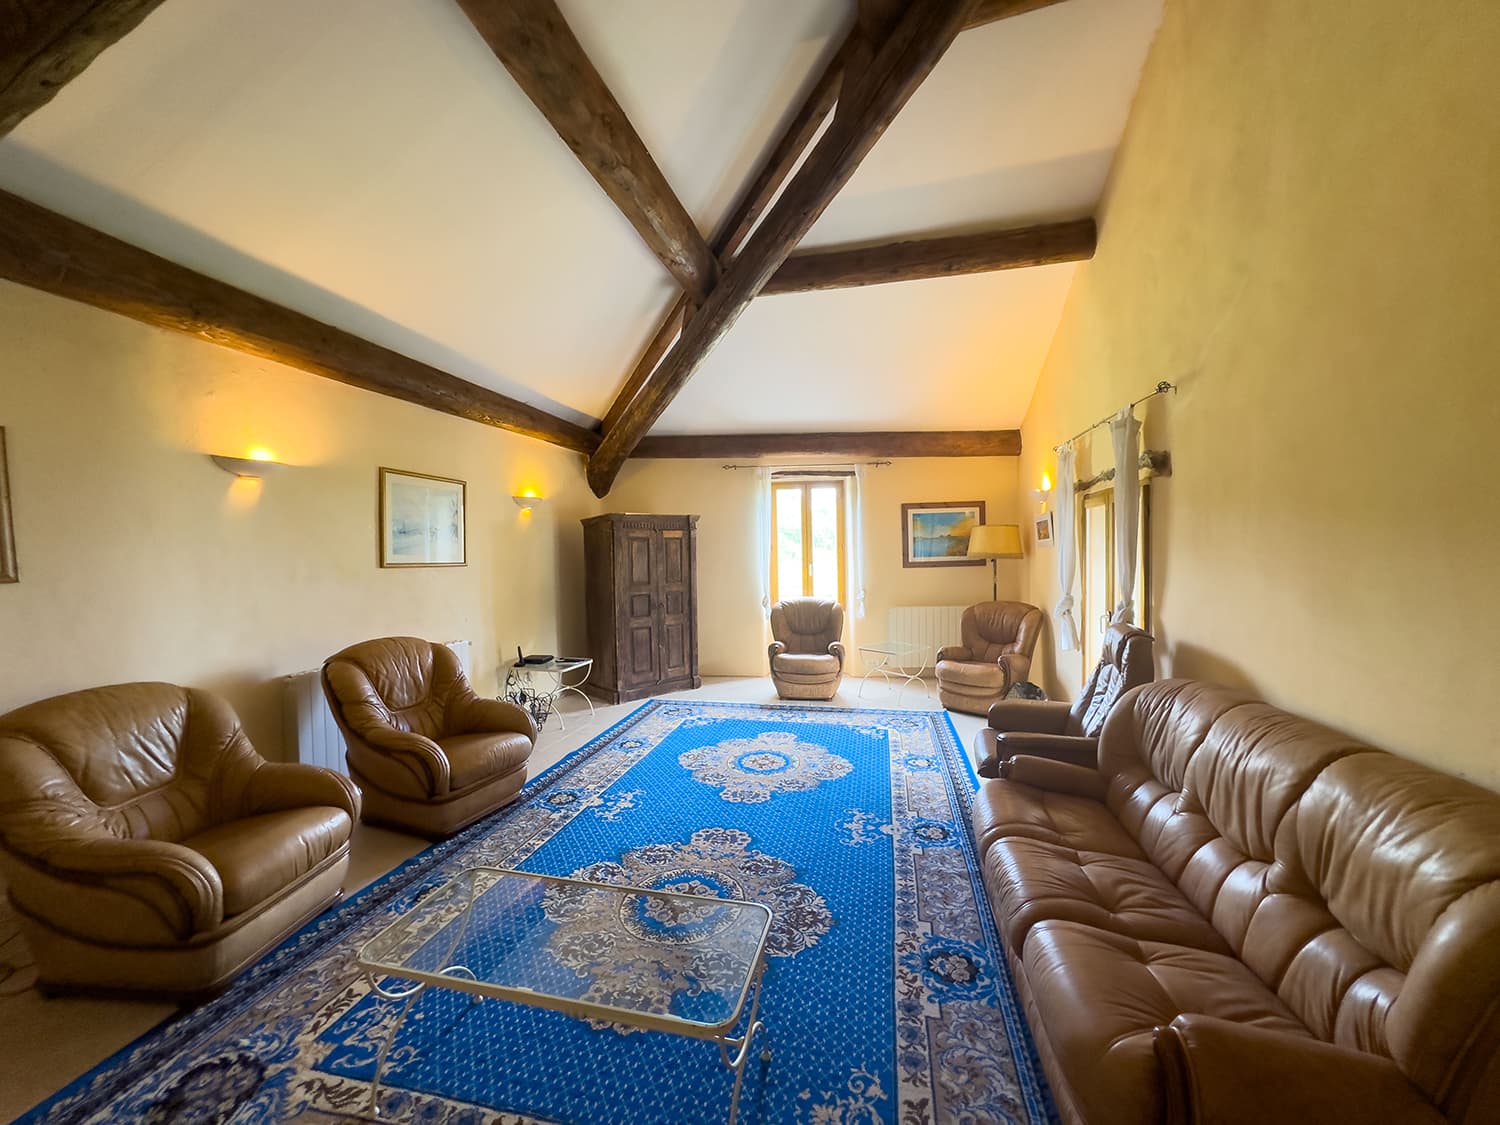 Sitting room | Holiday home in Gard, South of France